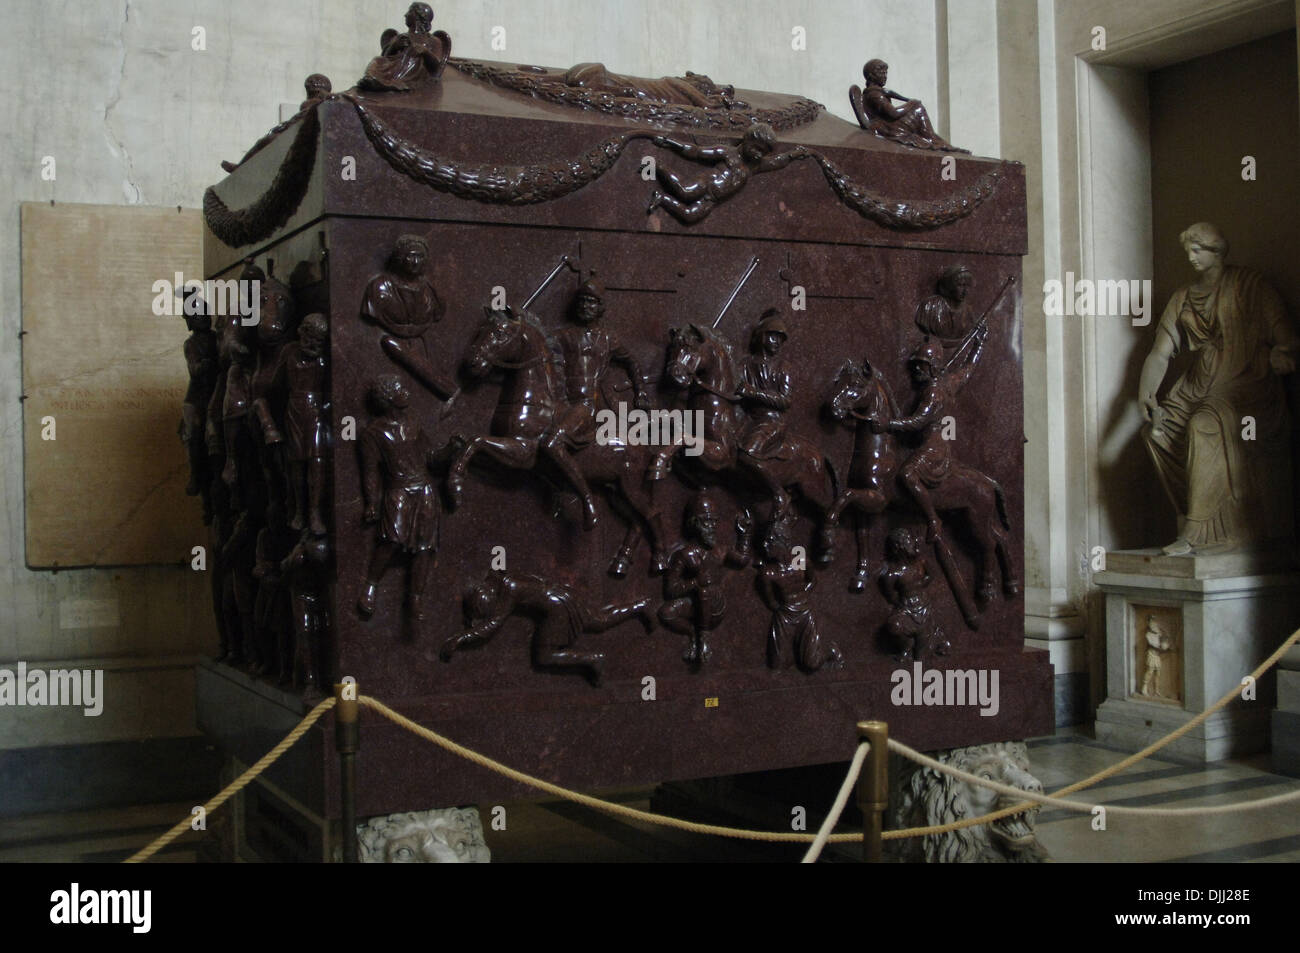 The sarcophagus of Helena. Red porphyry. Carved with military scenes with Roman soldiers on horseback and barbarian prisoners. Stock Photo